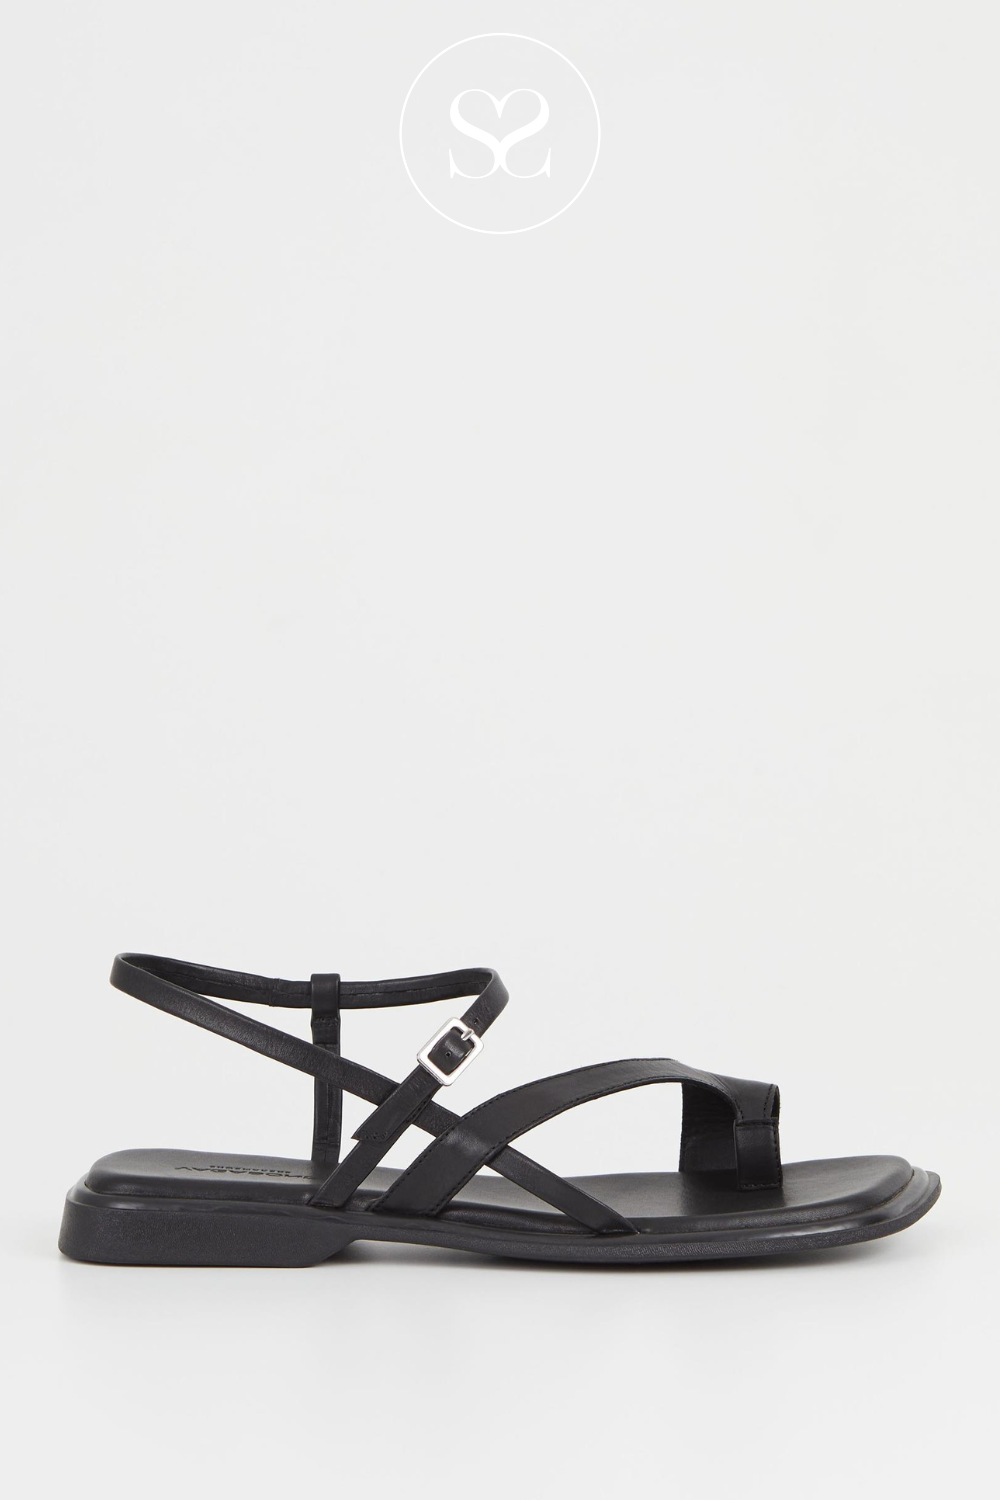 FLAT BLACK LEATHER SANDALS FROM VAGABOND - IZZY 001